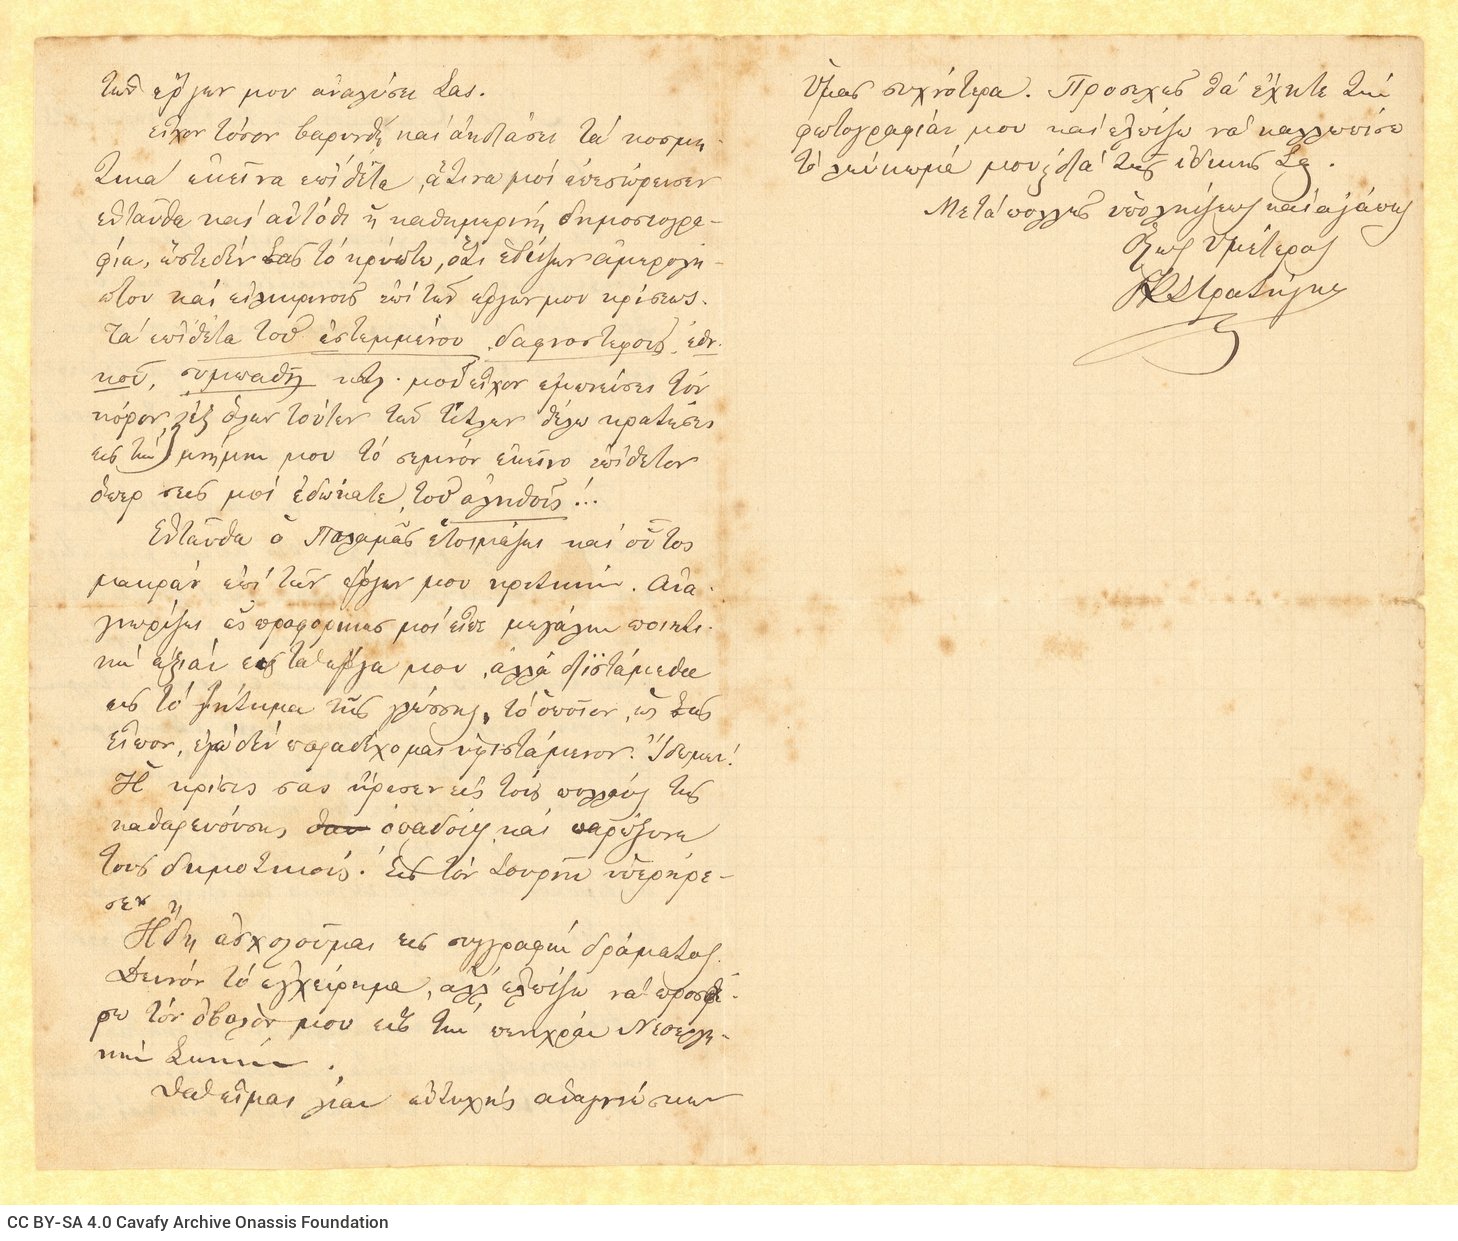 Handwritten letter by Georgios Stratigis to C. P. Cavafy in a bifolio; the last page is blank. Expression of thanks by G. Str